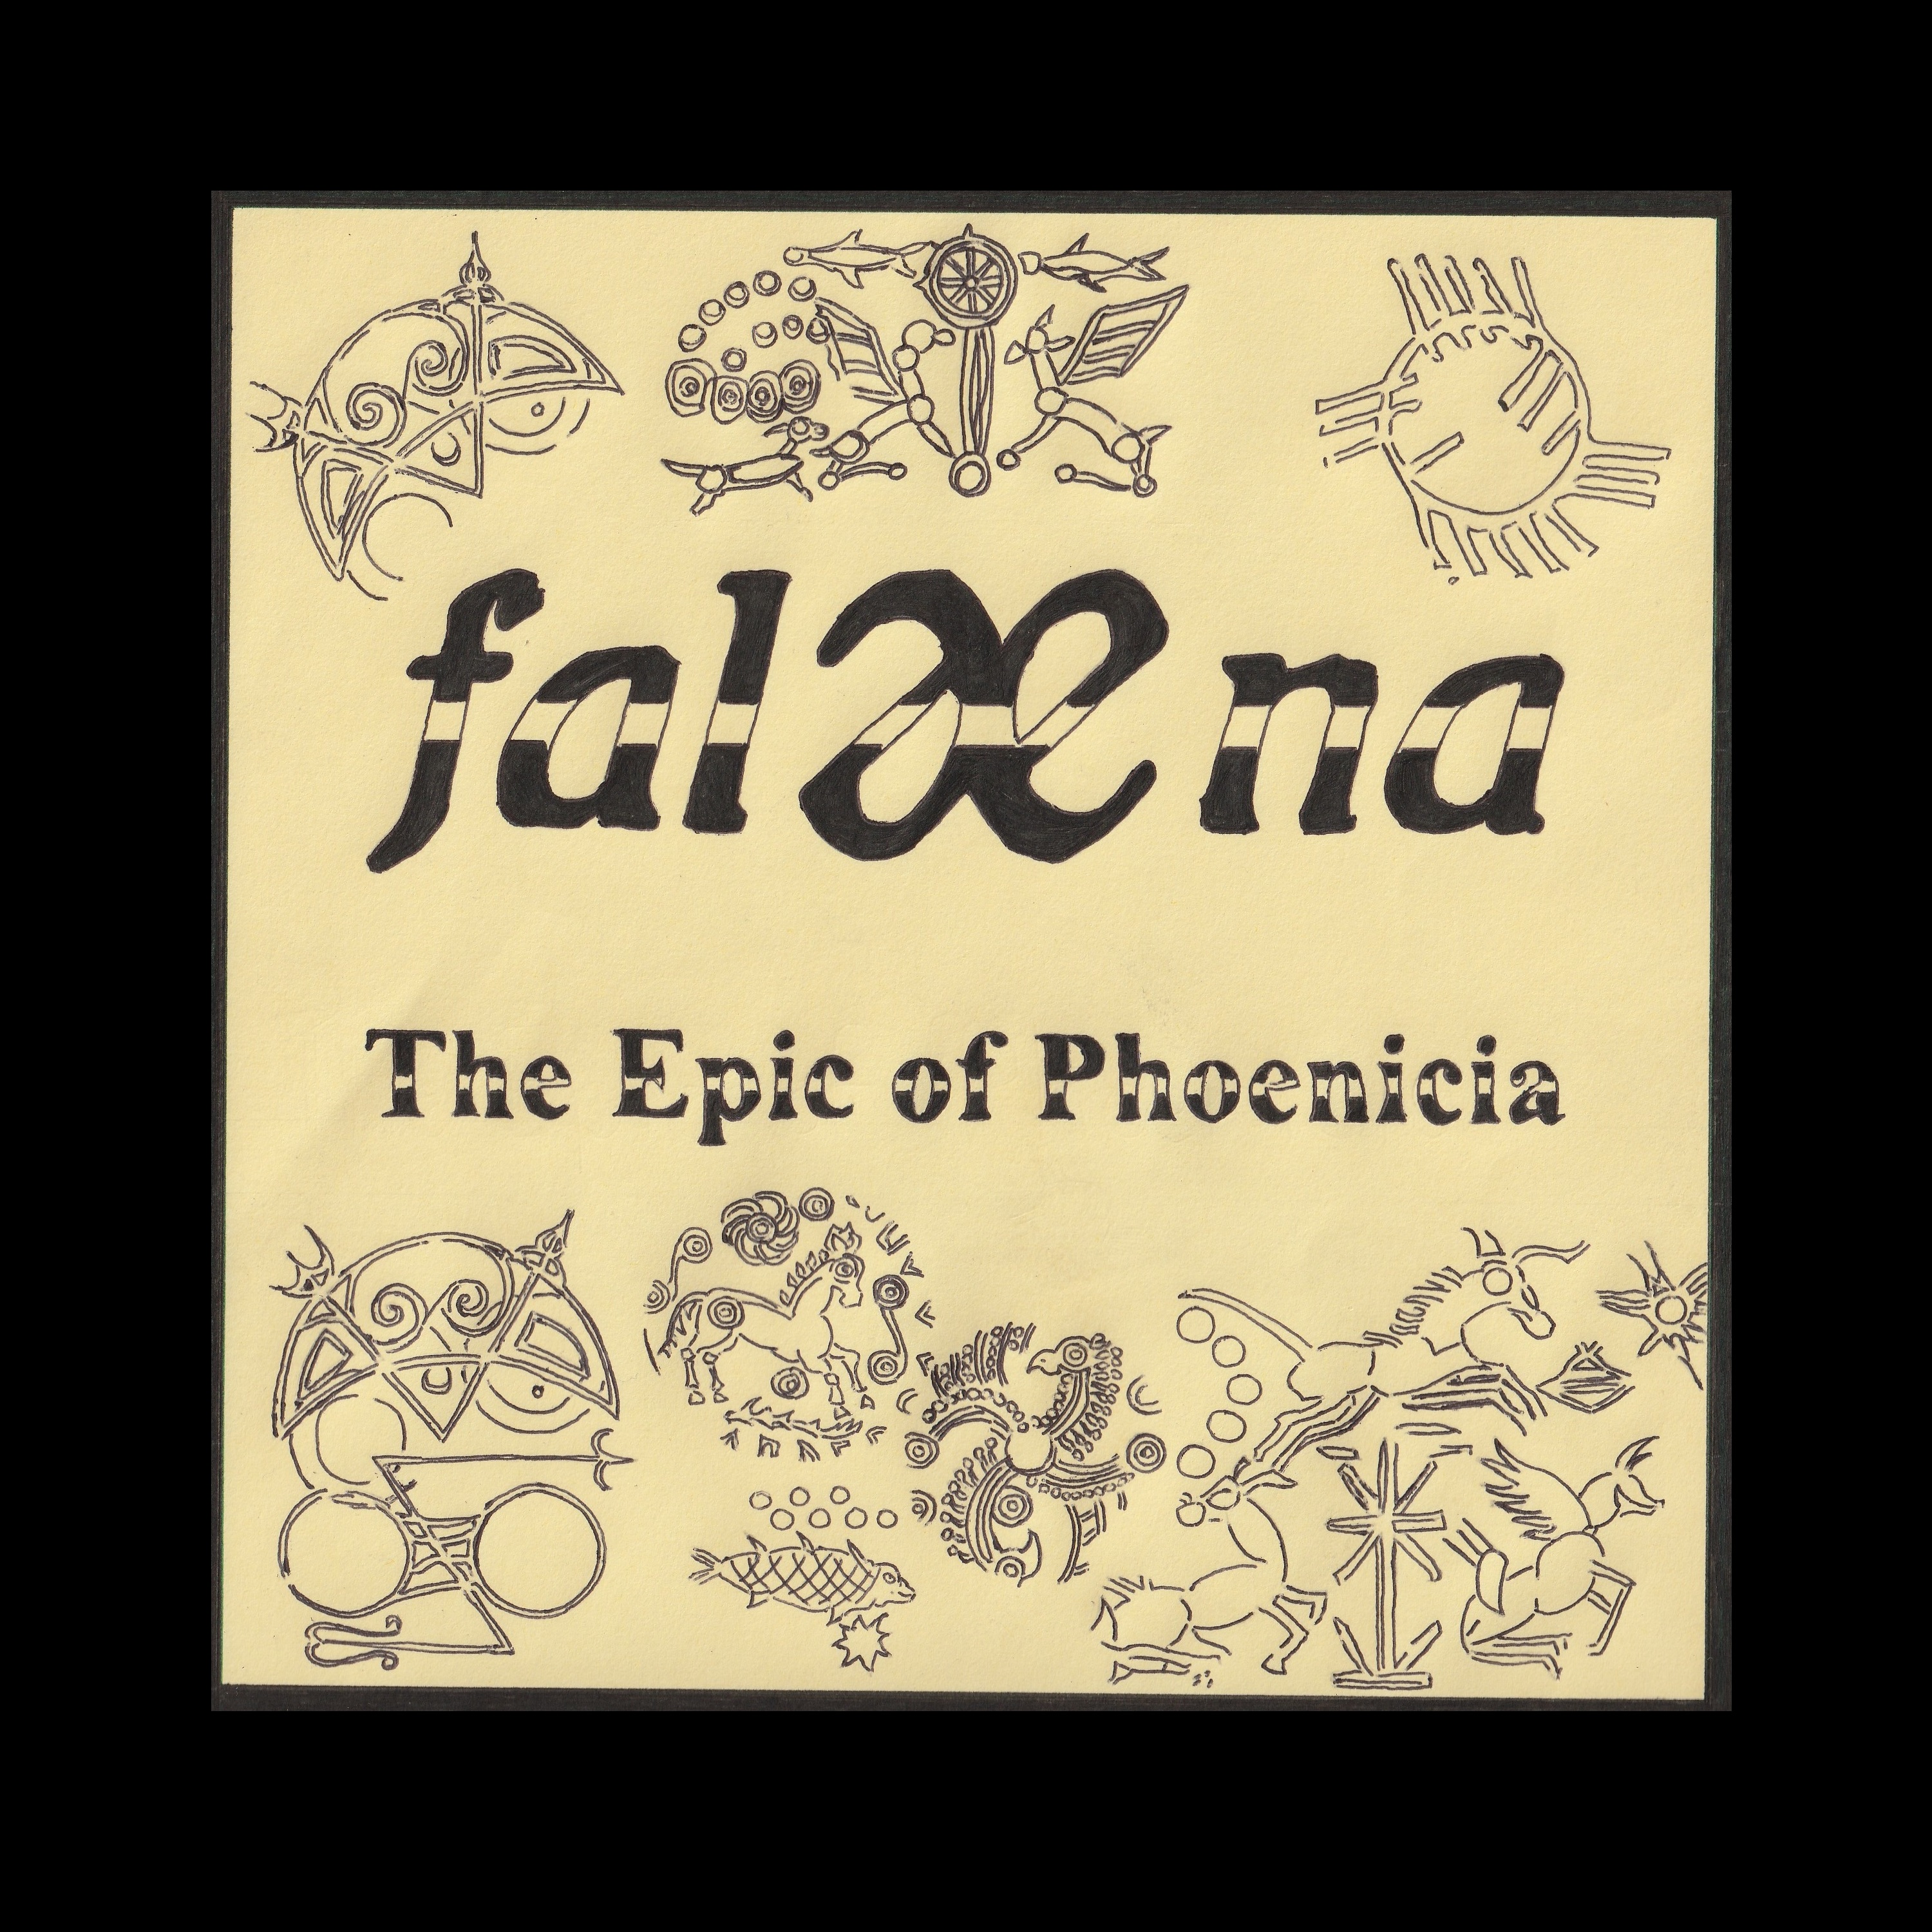 The Epic of Phoenicia